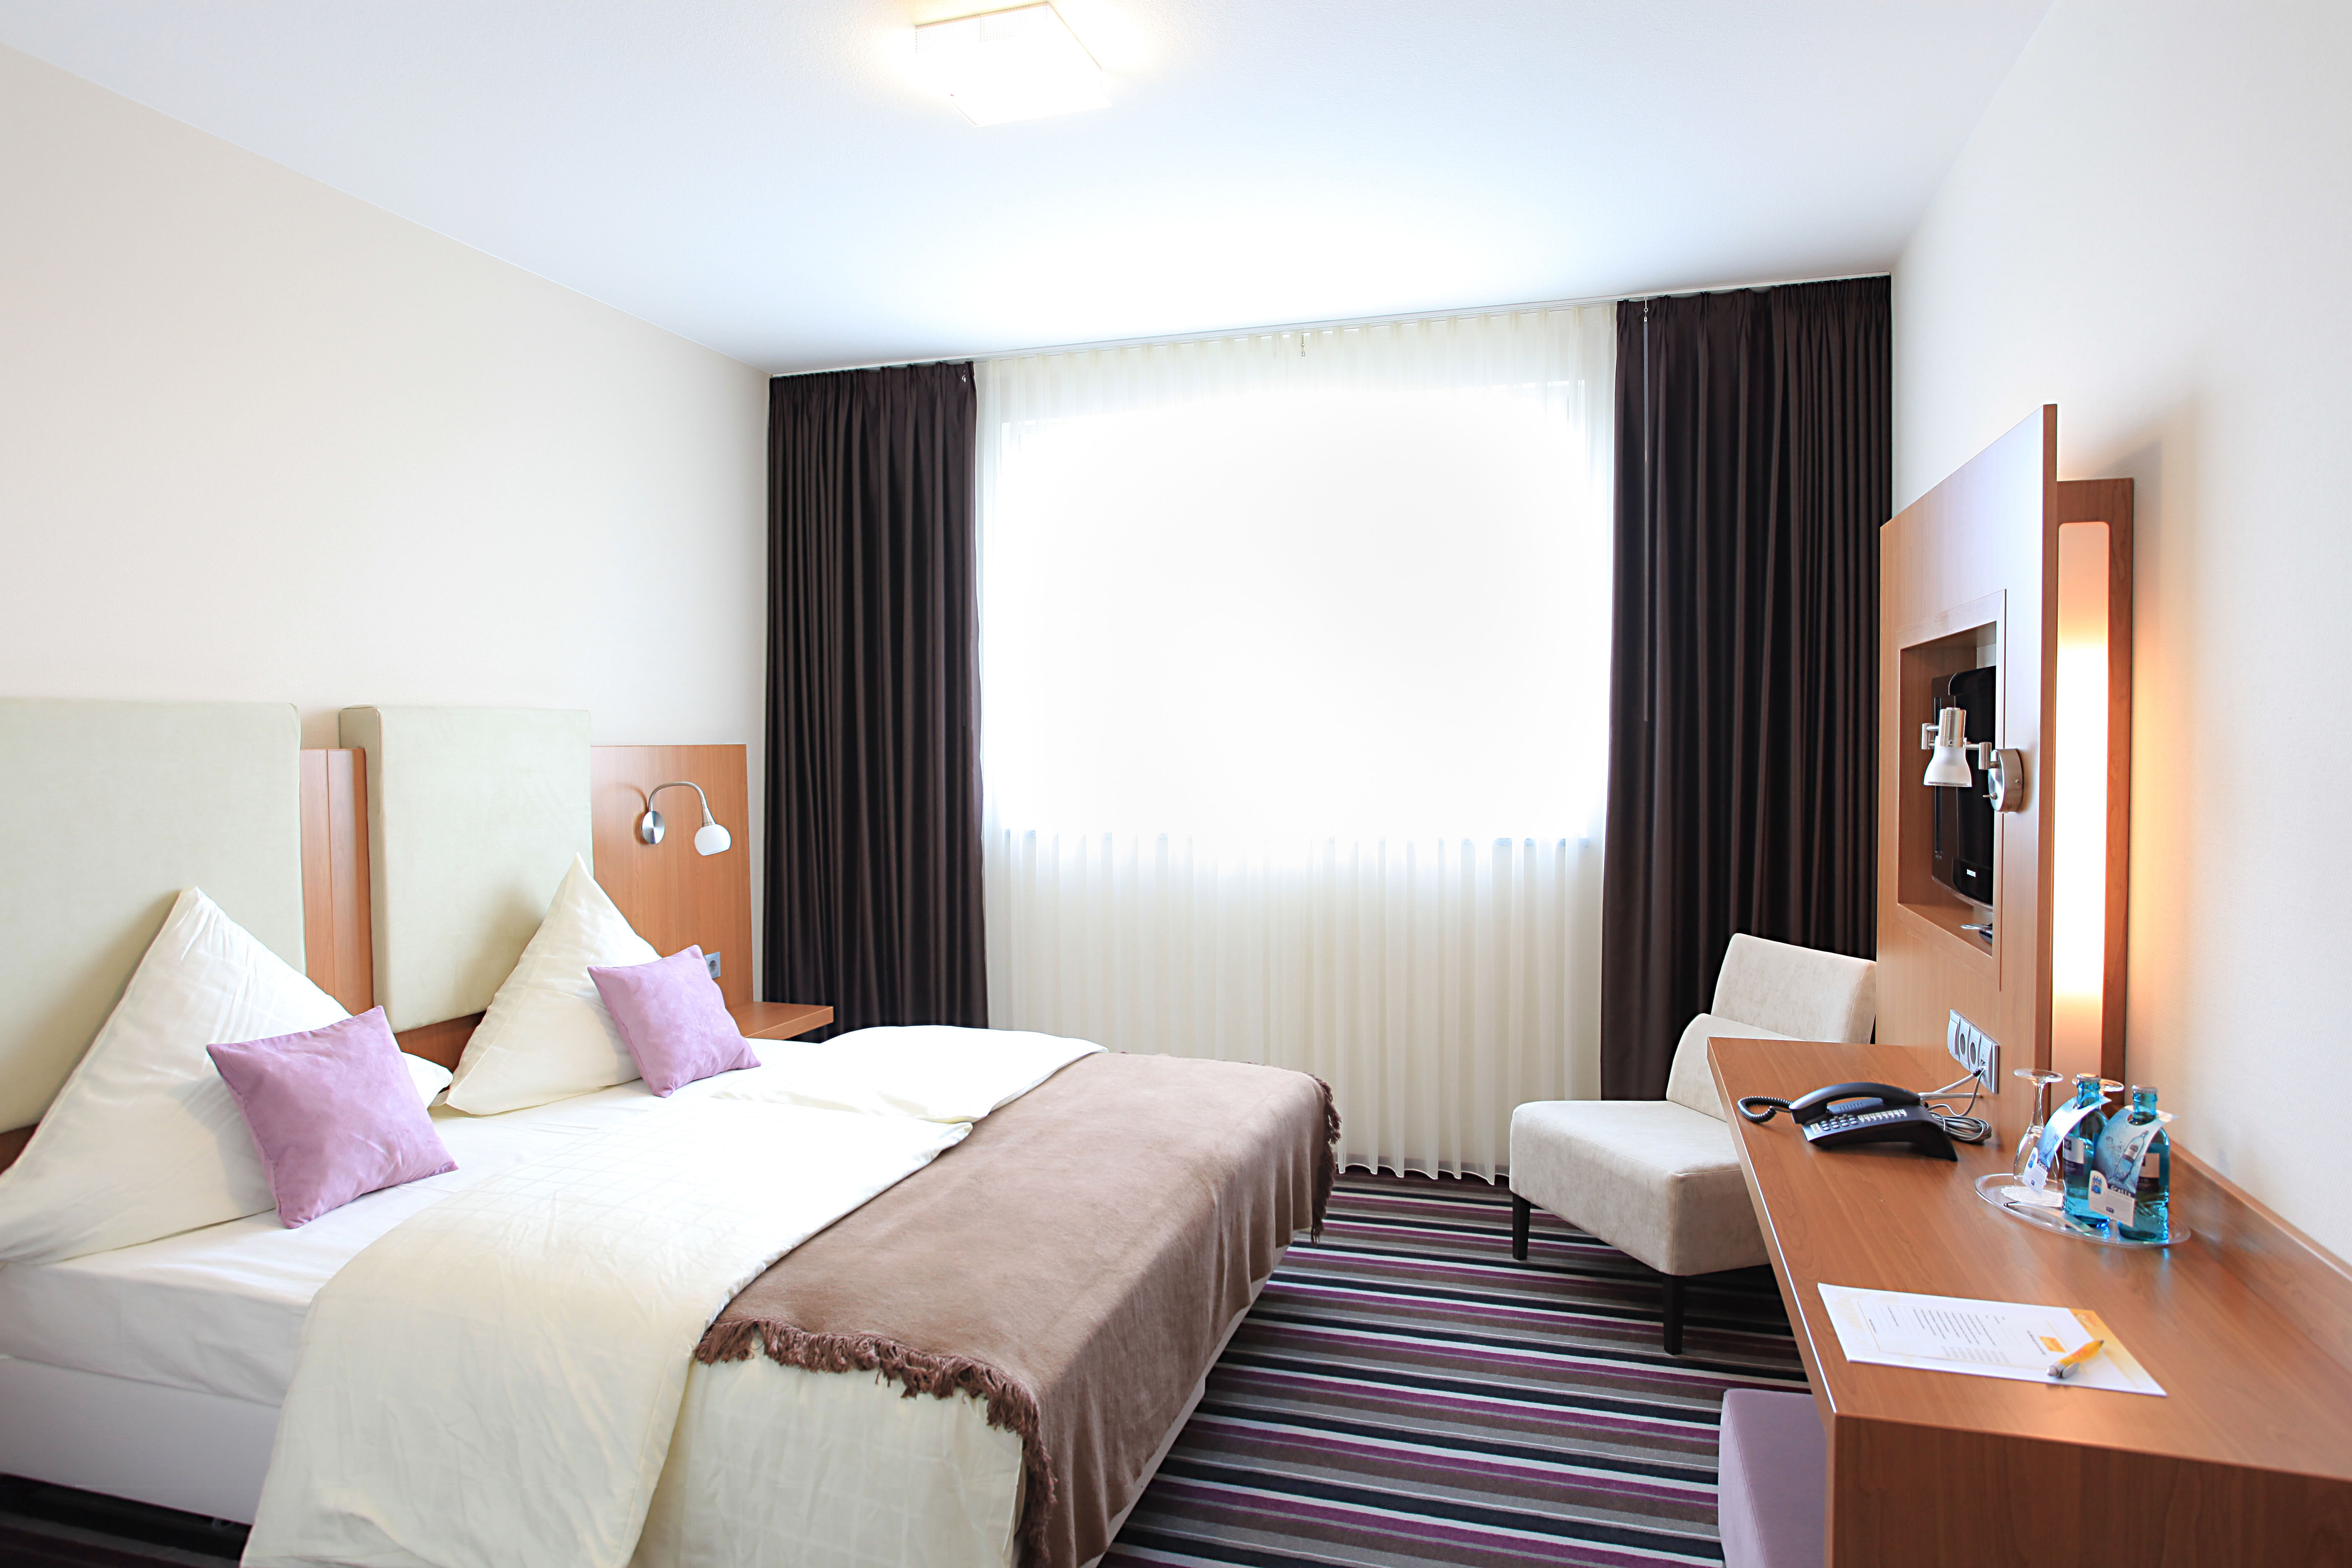 Qualitel Hotel Hilpoltstein <br/>59.00 ew <br/> <a href='http://vakantieoplossing.nl/outpage/?id=7b2afc48771728e2a9d75499a5ed3088' target='_blank'>View Details</a>